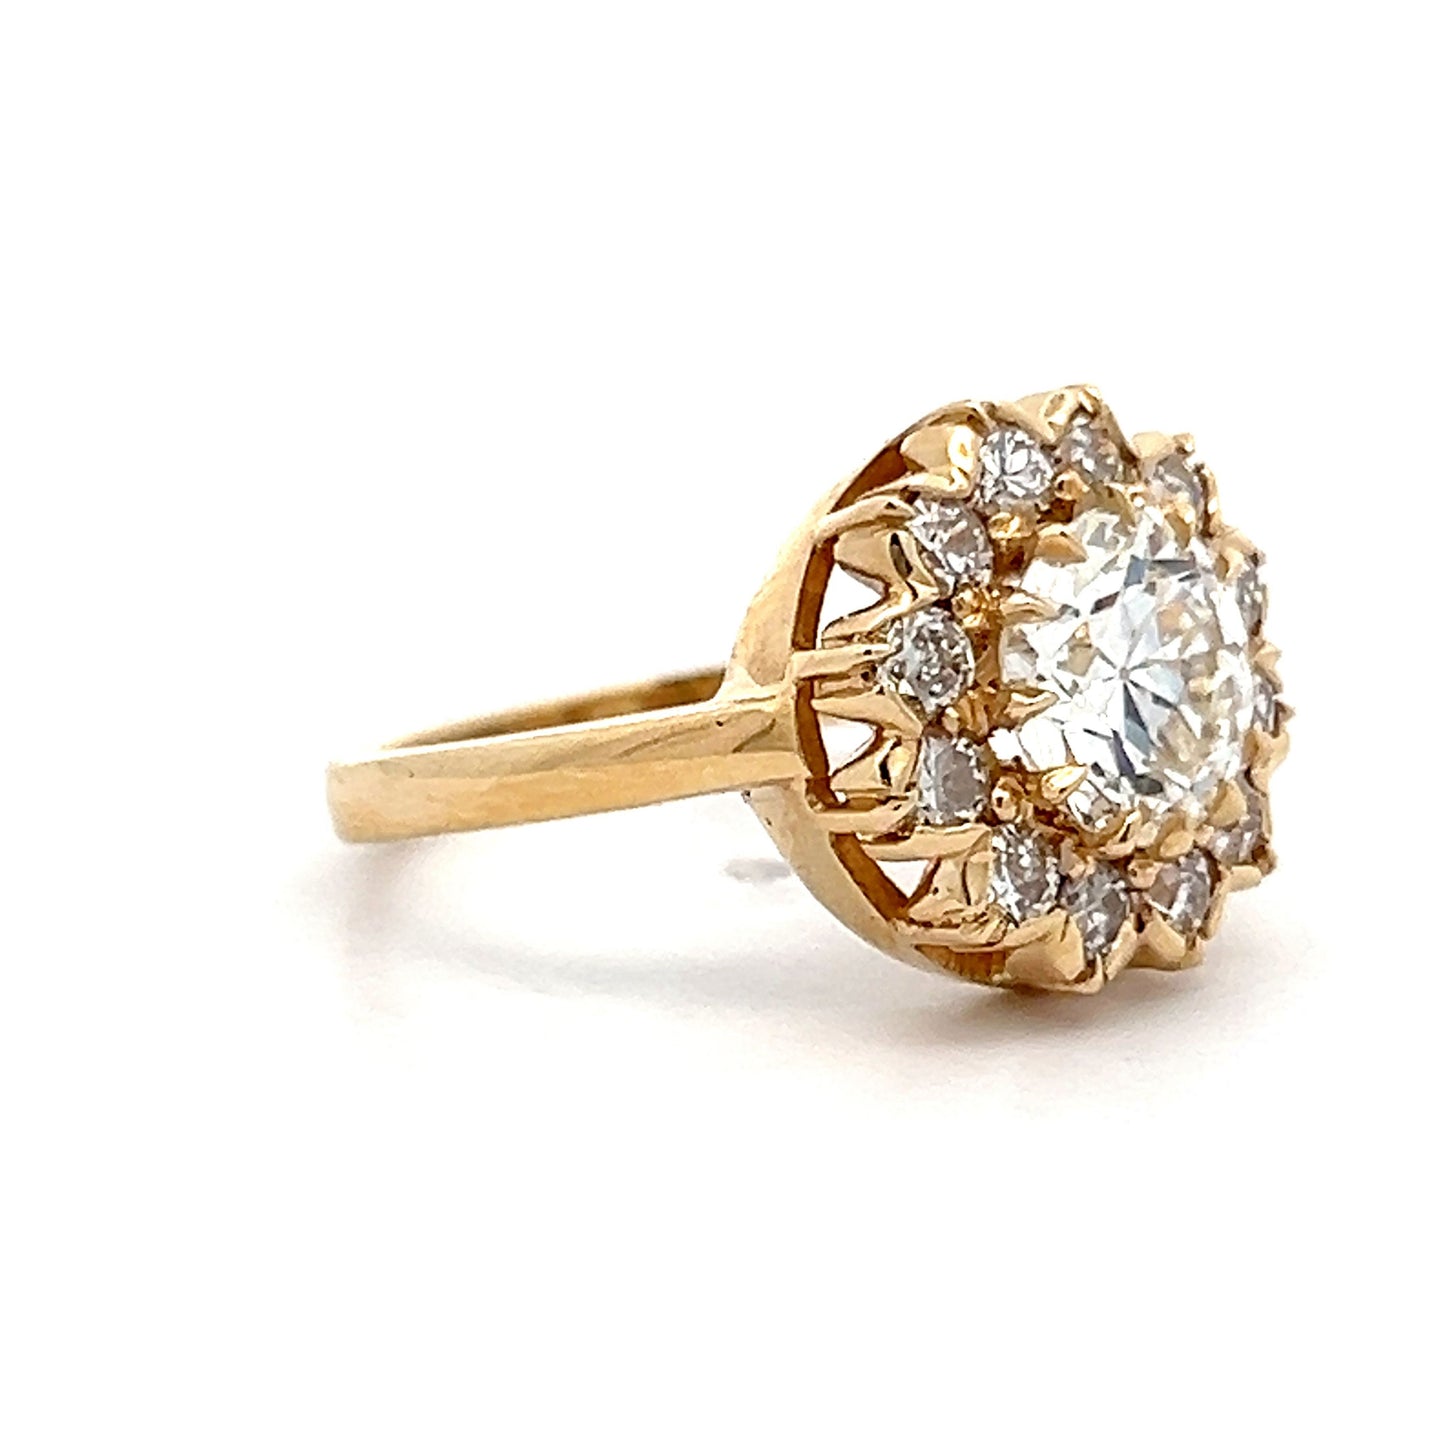 Vintage Victorian Inspired Diamond Halo Engagement Ring in Yellow Gold